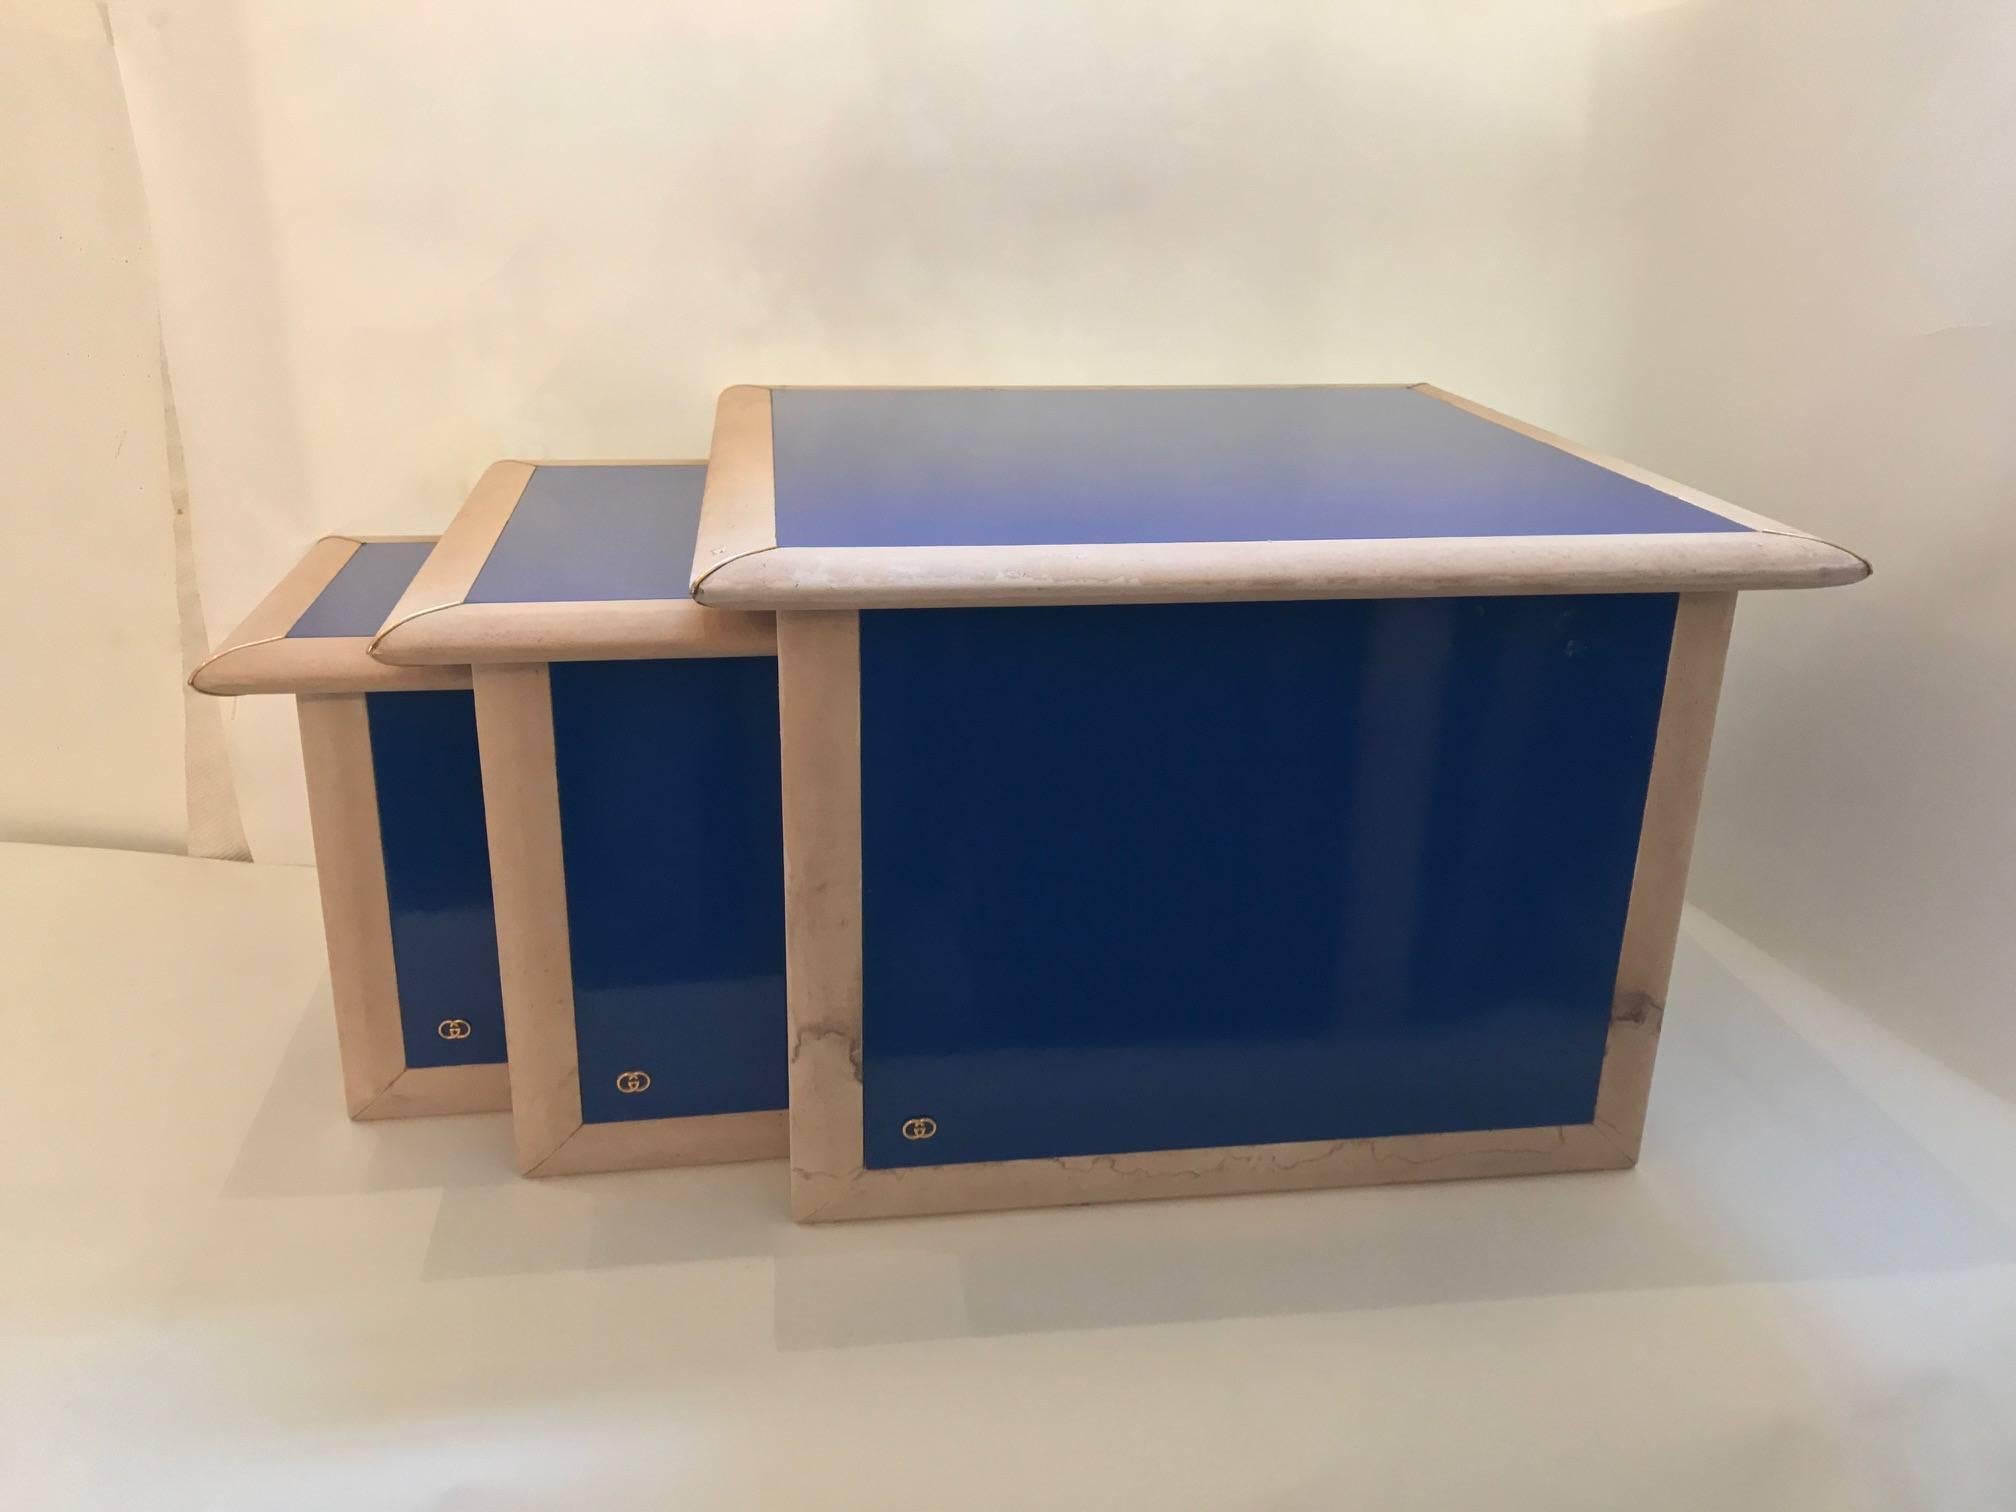 Italian, 1960s nest of tables by "Gucci", In Gucci blue lacquer and bone colour leather edges with decorative brass corners. With a "Gucci" logo on the sides.
Measures: 60 x 60 x 41cm. or 23.5 x 23.5 x 16in.
45 x 45 x 36cm. or